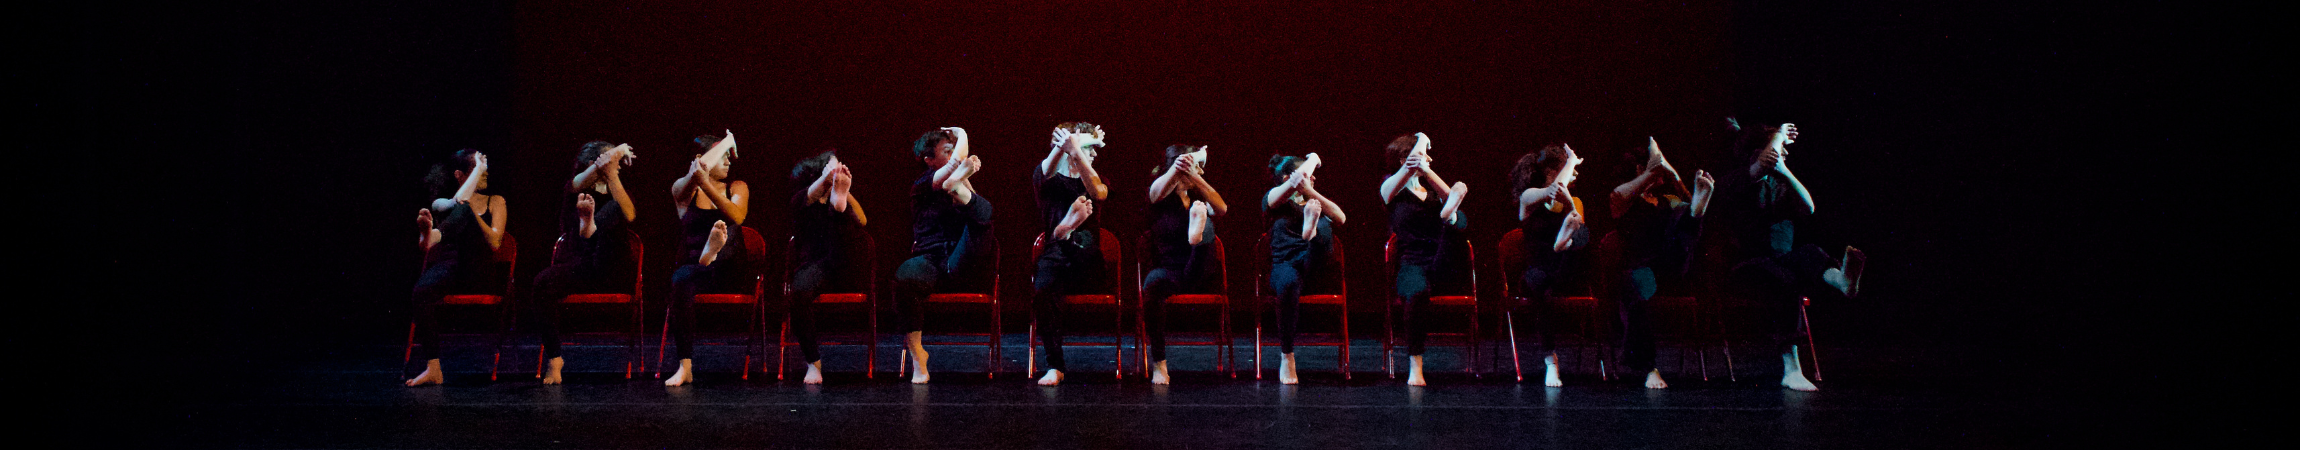 A group of dancers in a row with red chairs.